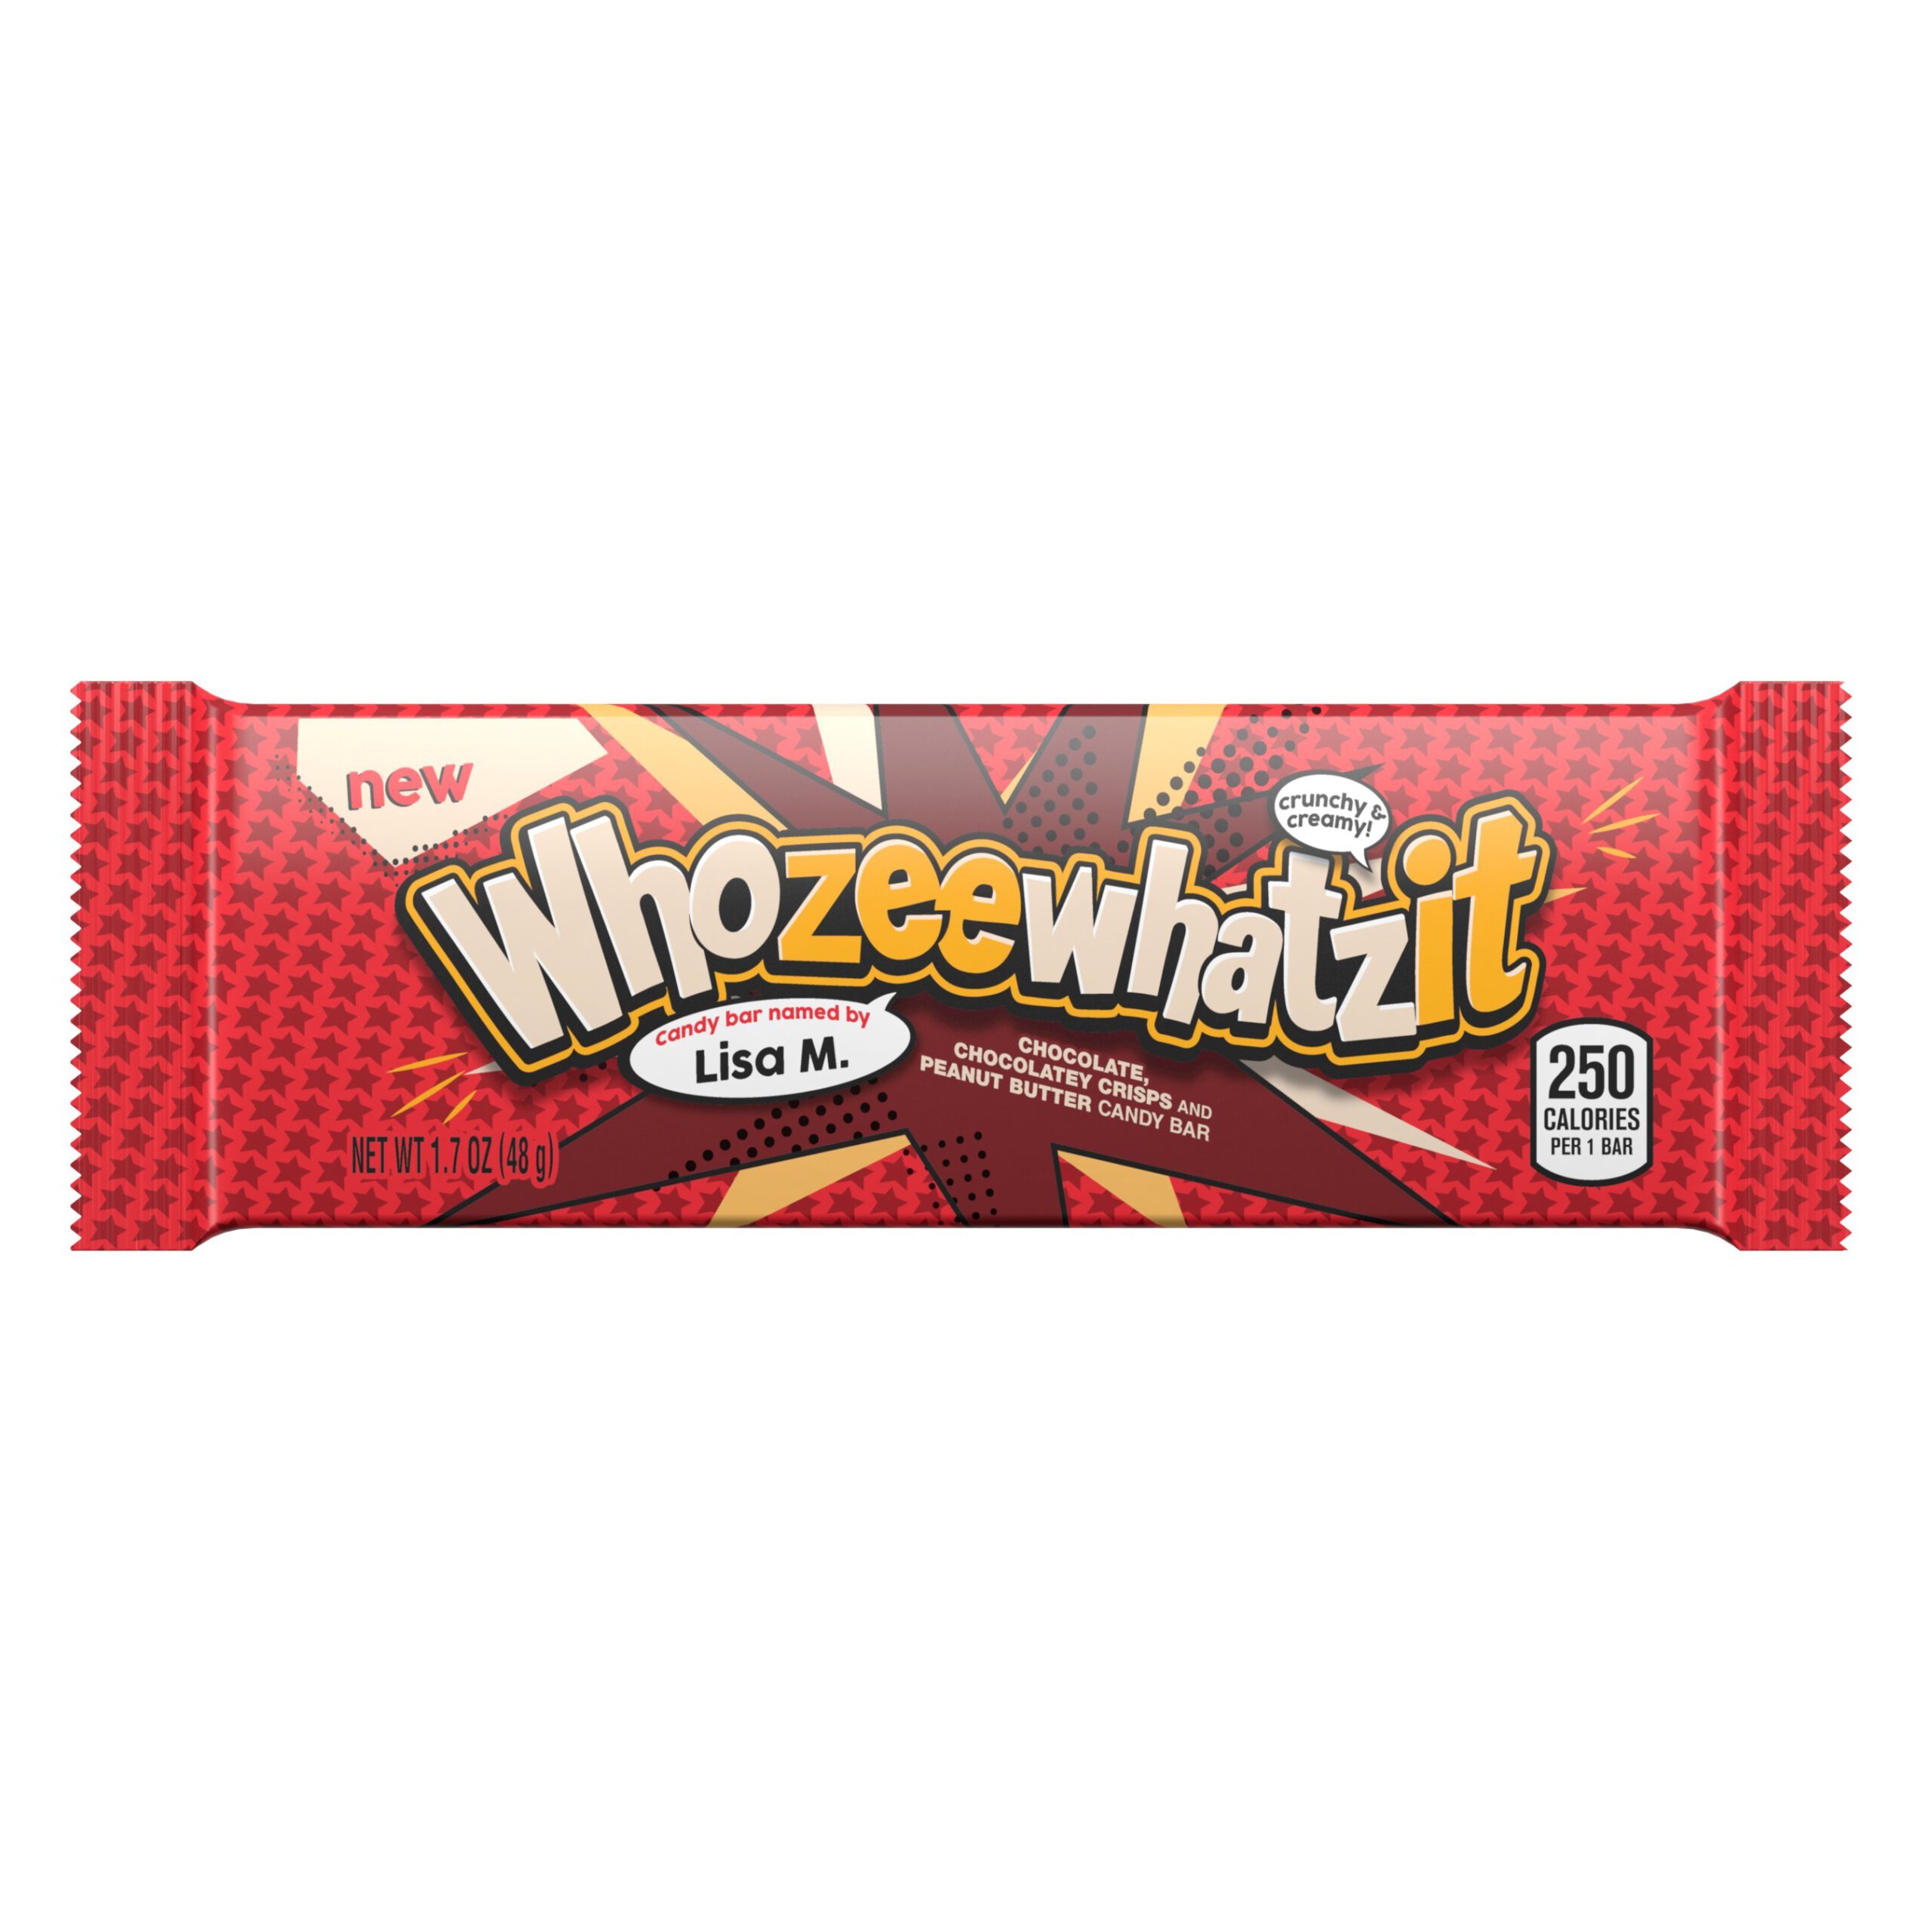 Top 10: Hershey unveils Whozeewhatzit, Kroger store to go all-in on self-checkout, report forecasts restaurant growth